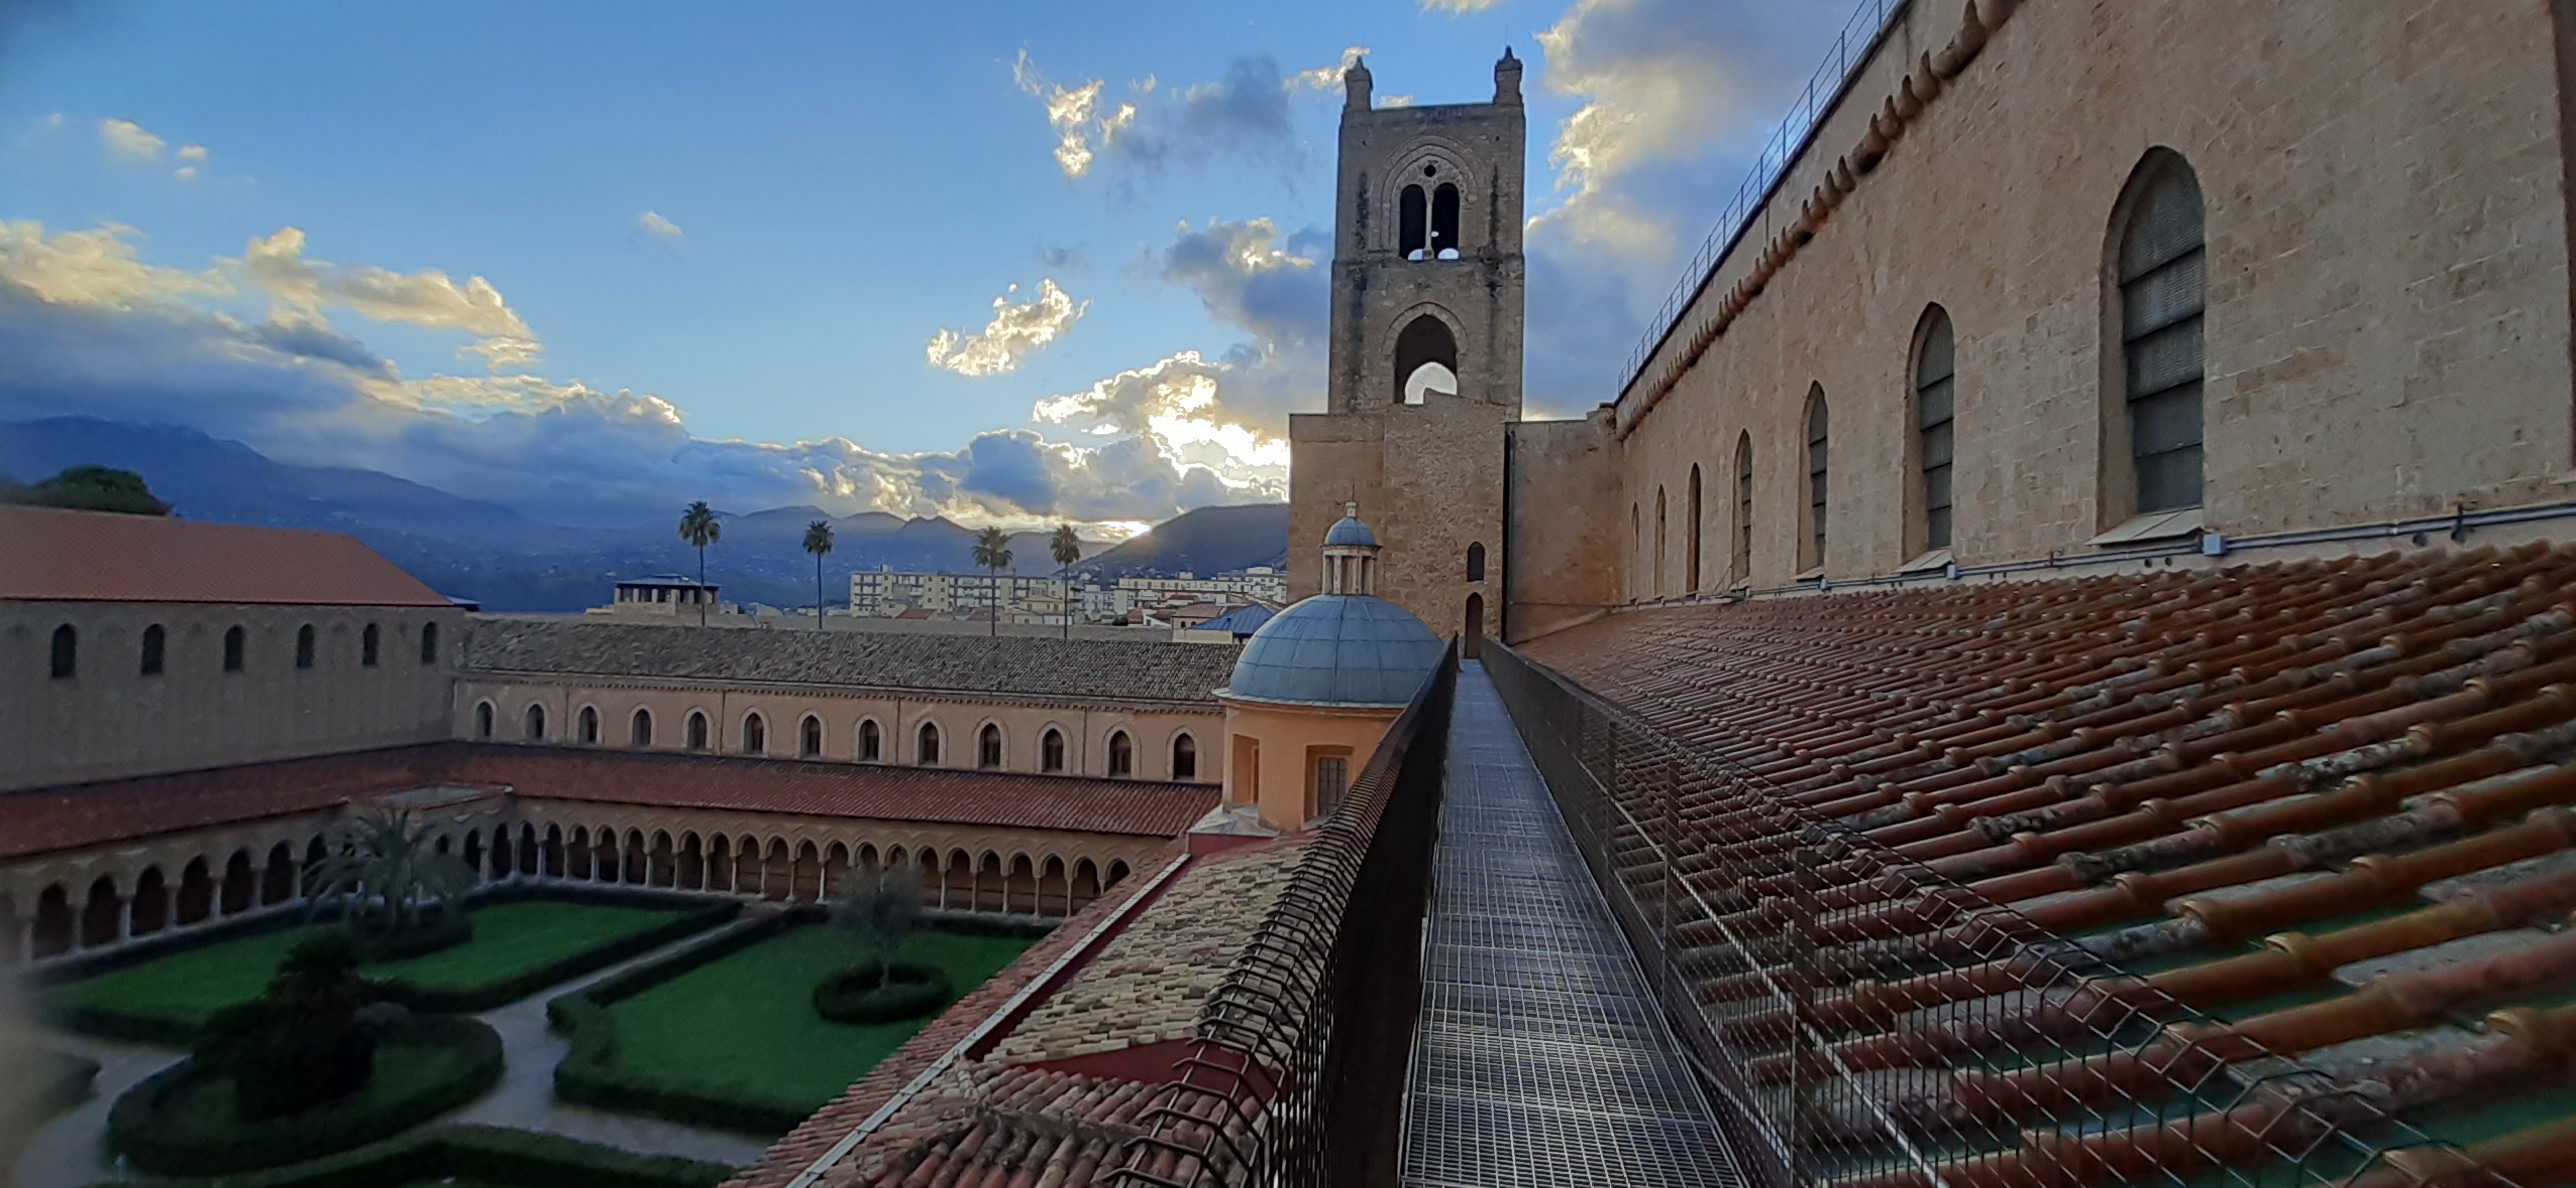 Monreale Cathedral and cloister, high on a hill above Palermo